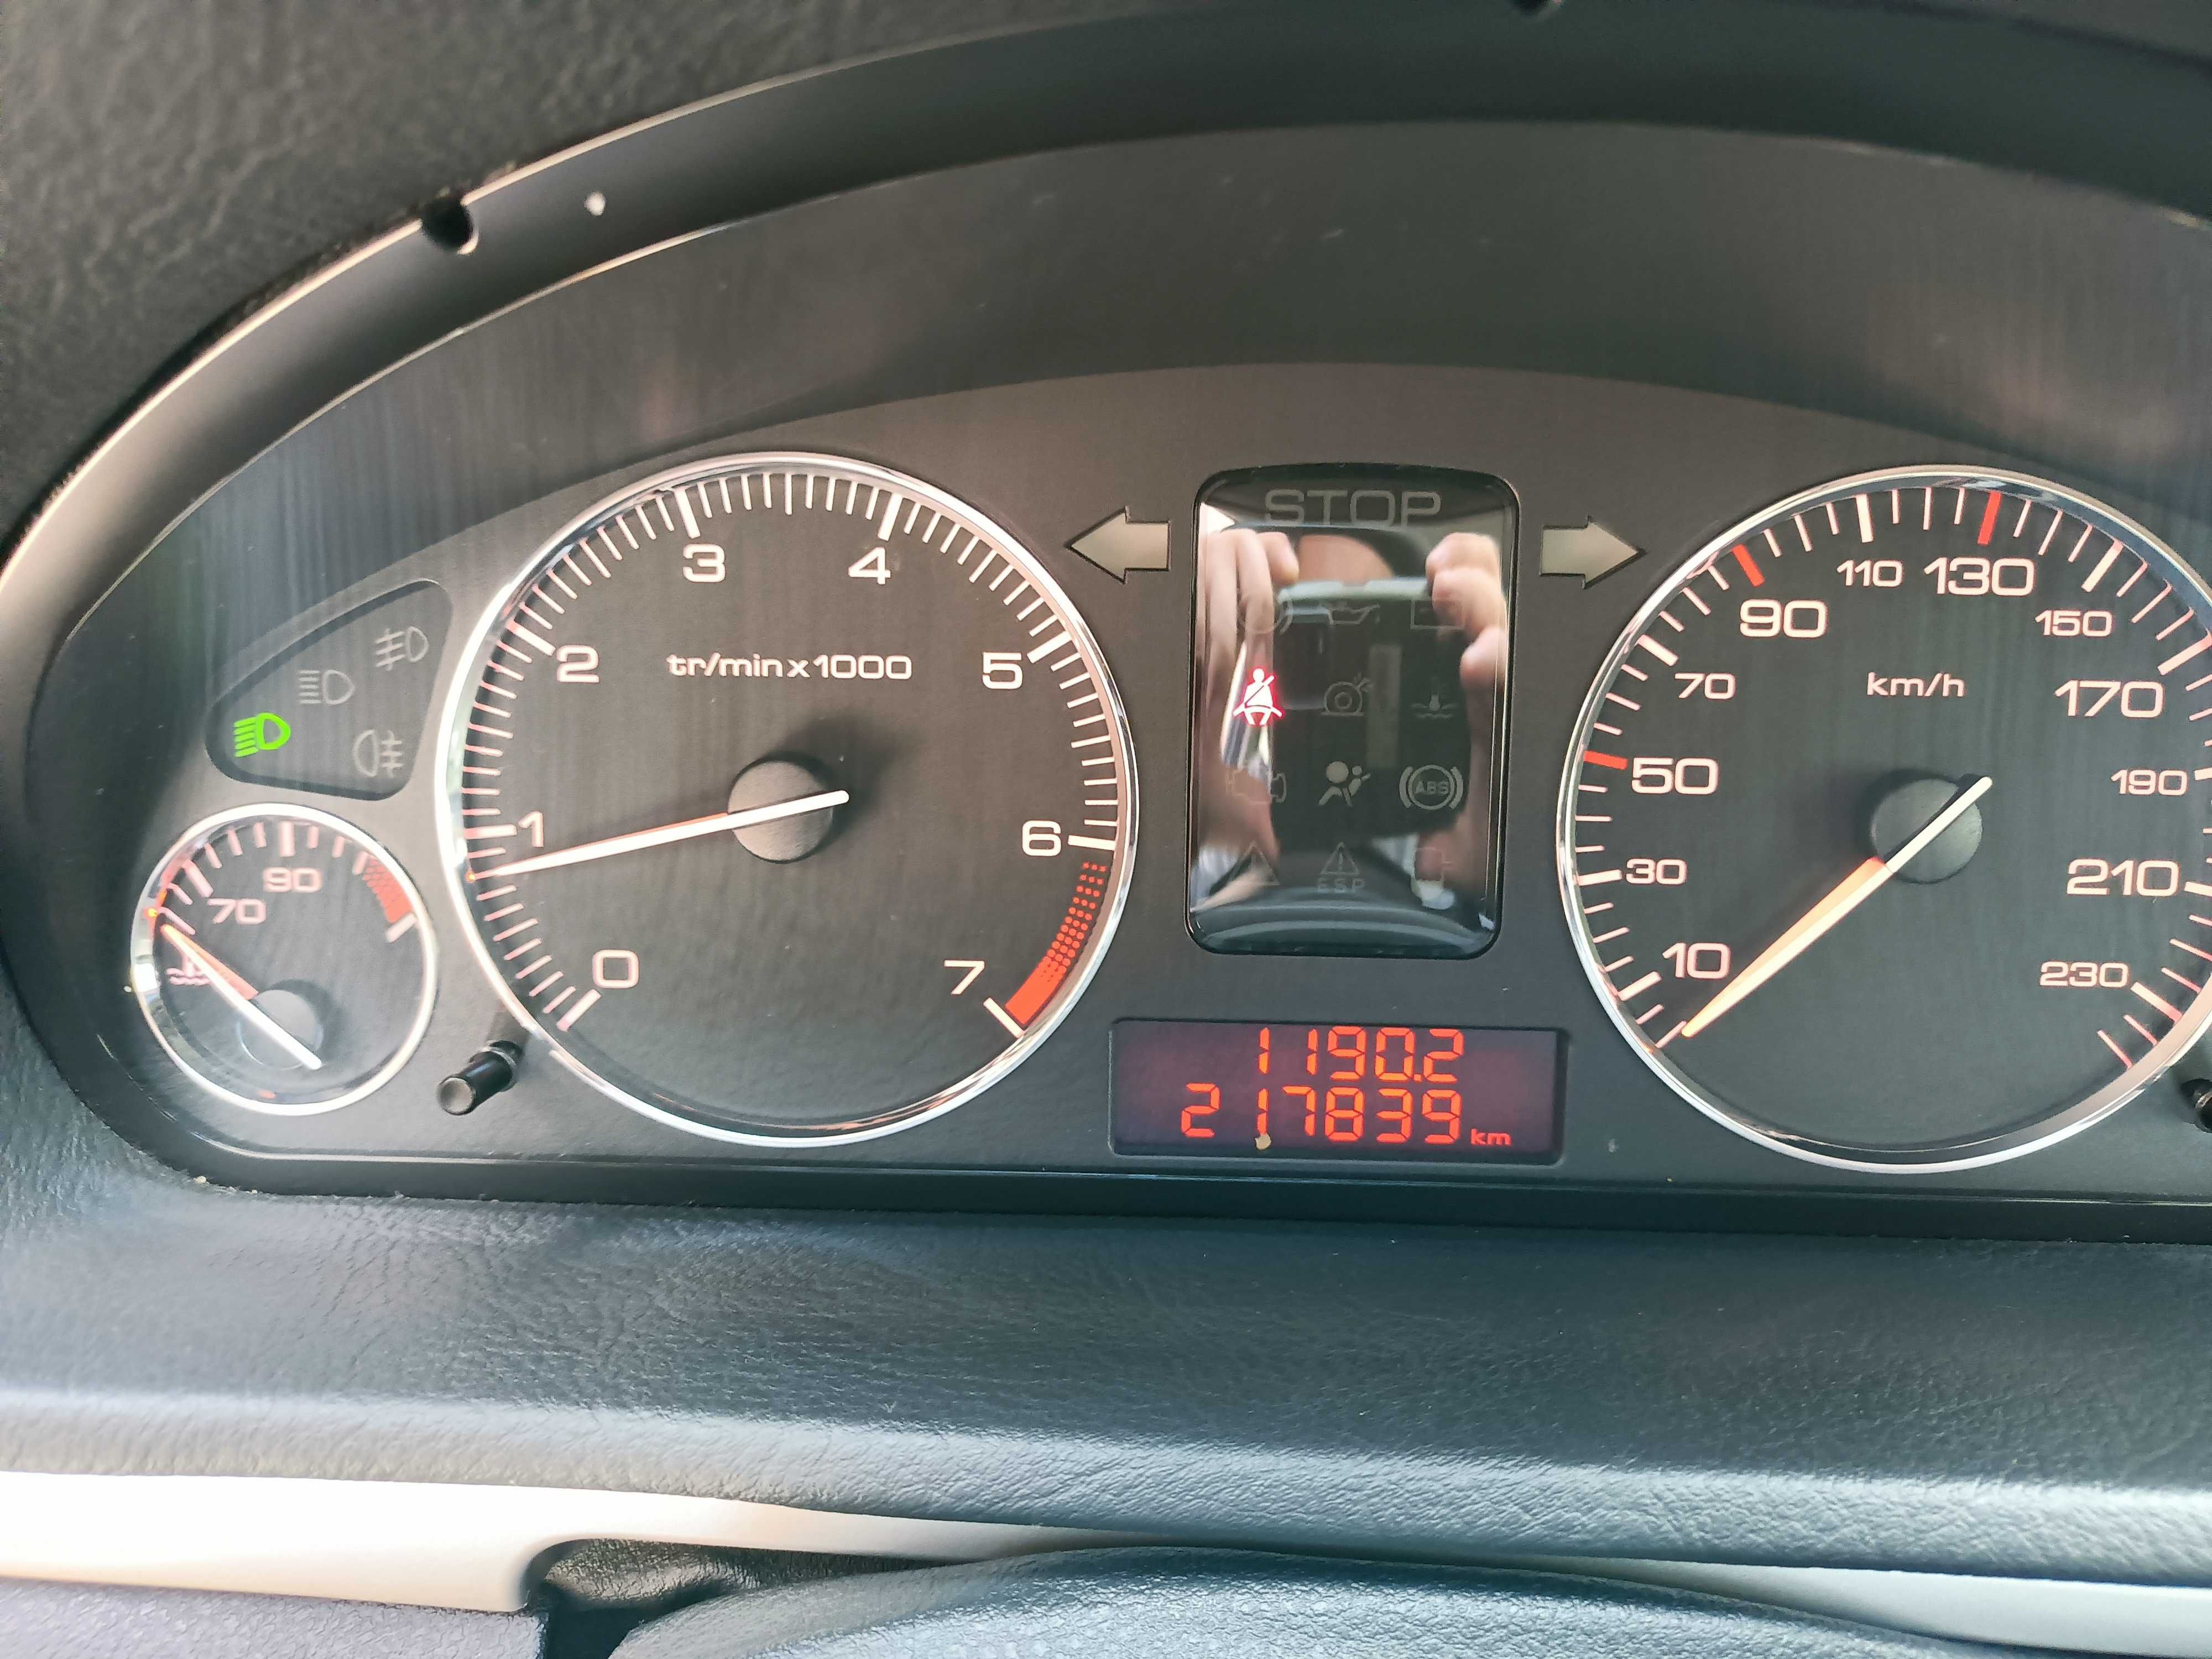 Peugeot 407 SW 2006 1,8 benzyna, 125KM, panorama